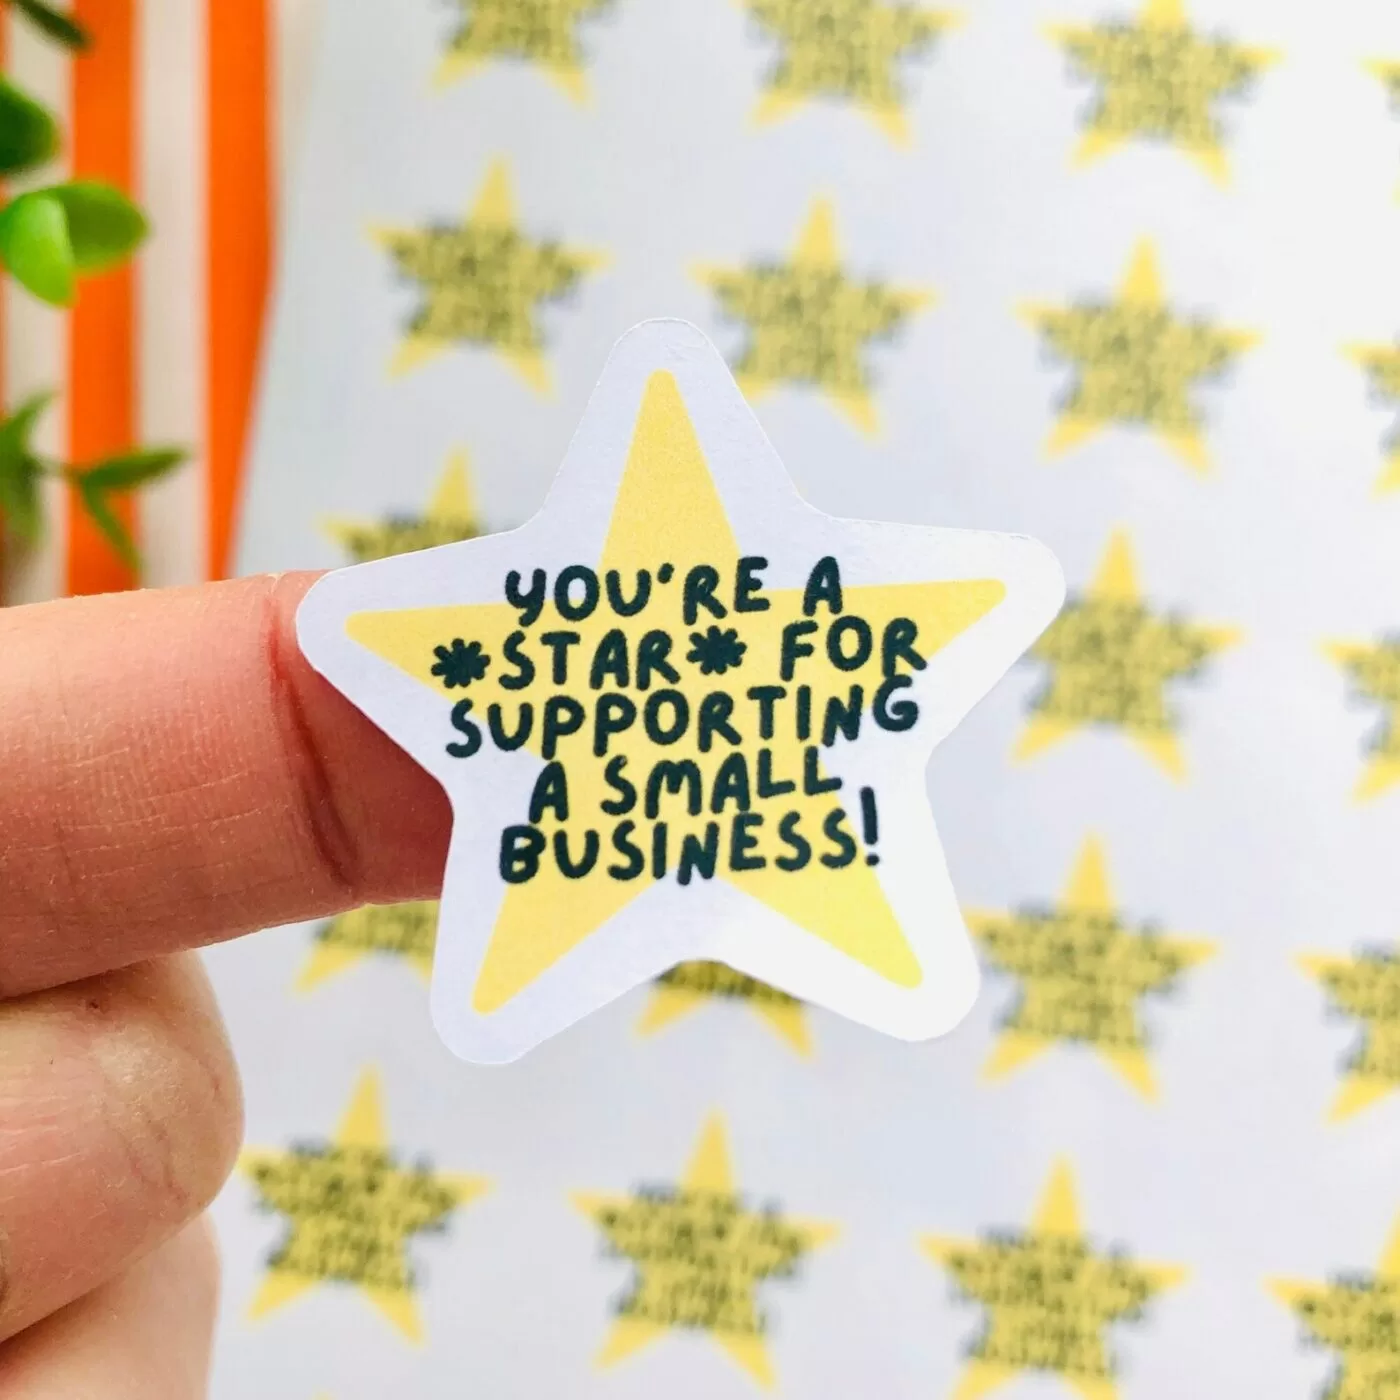 You're a star for supporting a small business written on a star-shaped sticker